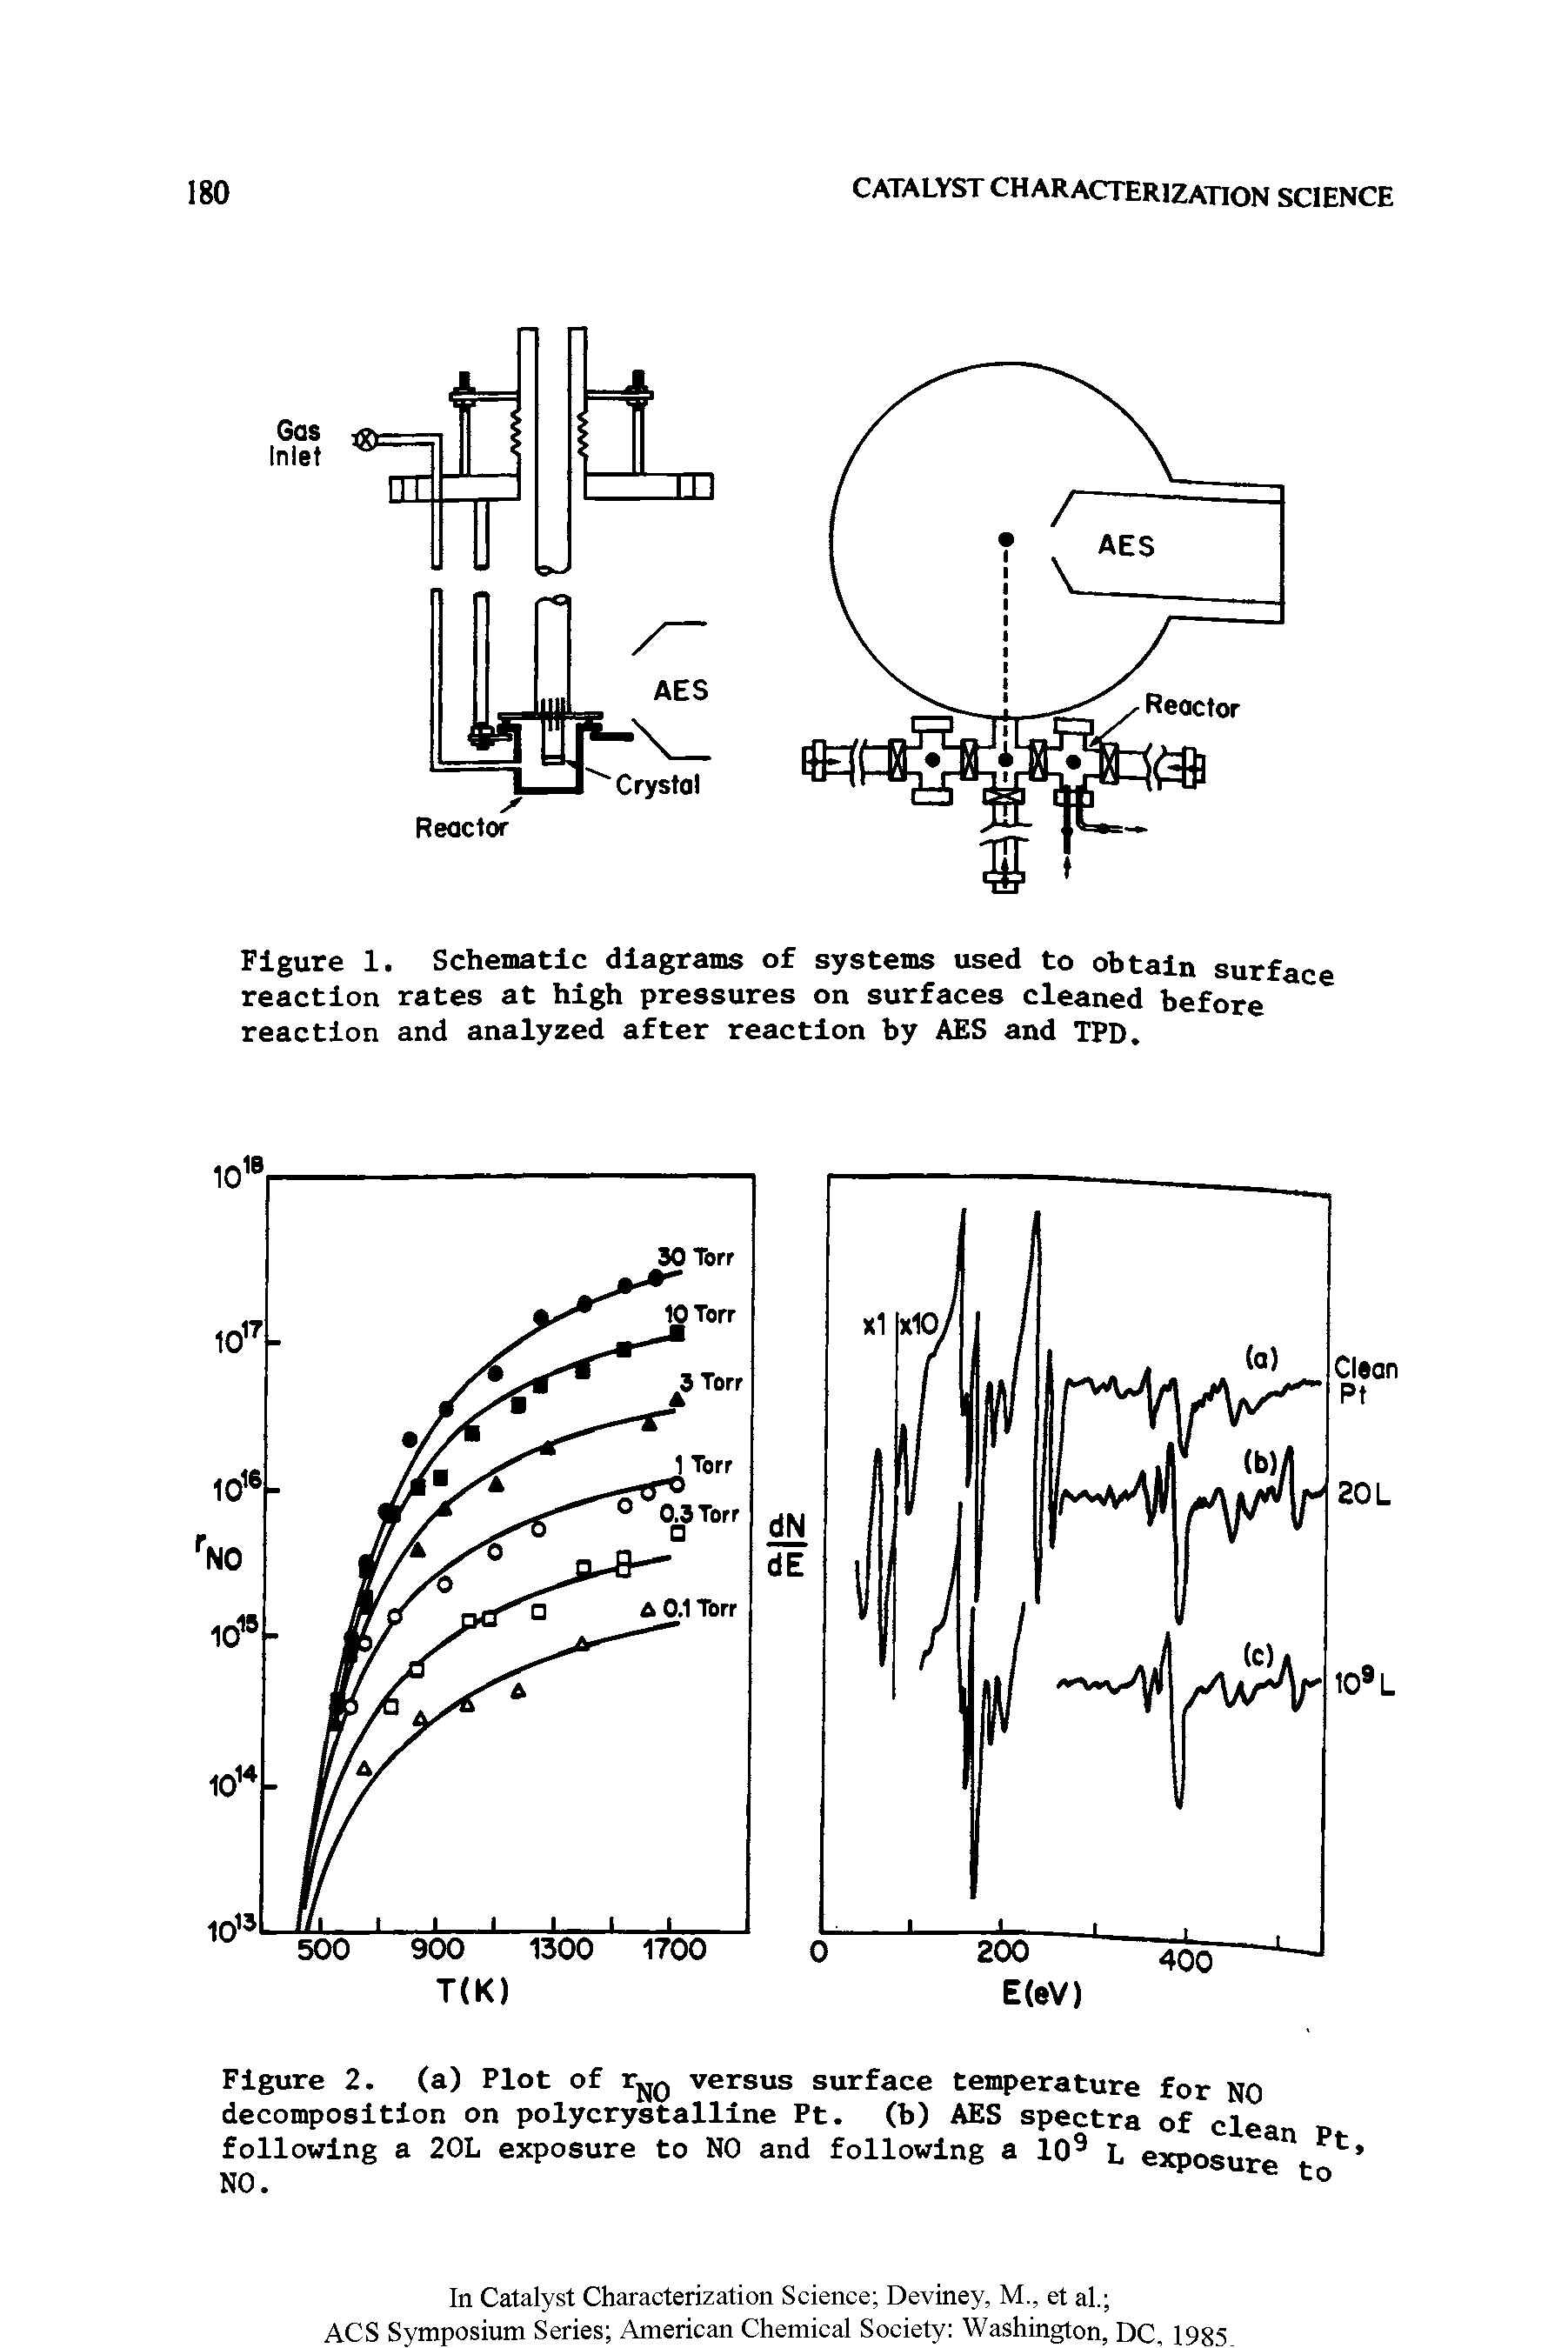 Figure 1. Schematic diagrams of systems used to obtain surfac reaction rates at high pressures on surfaces cleaned before reaction and analyzed after reaction by AES and TED.